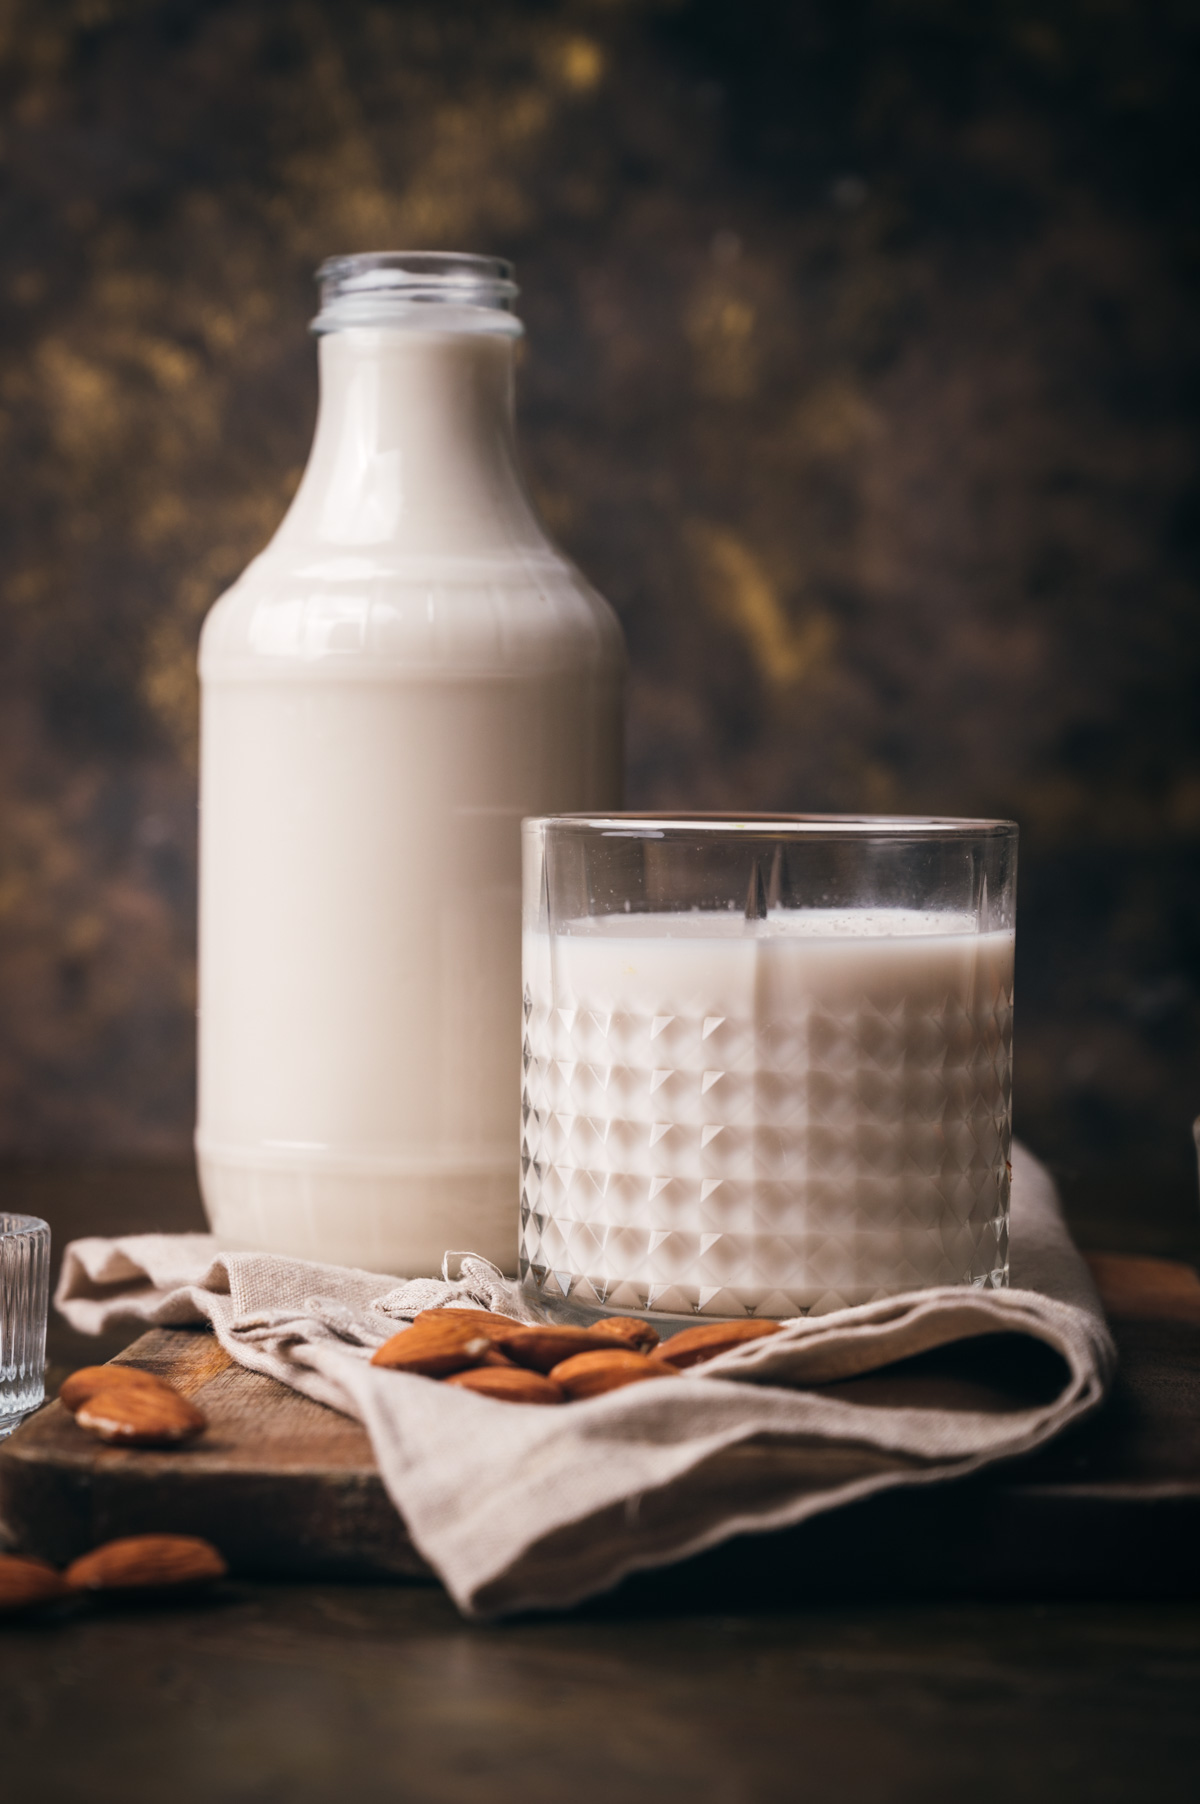 A bottle and a glass filled with milk on a wooden table, accompanied by almonds and a cloth, against a dark backdrop.